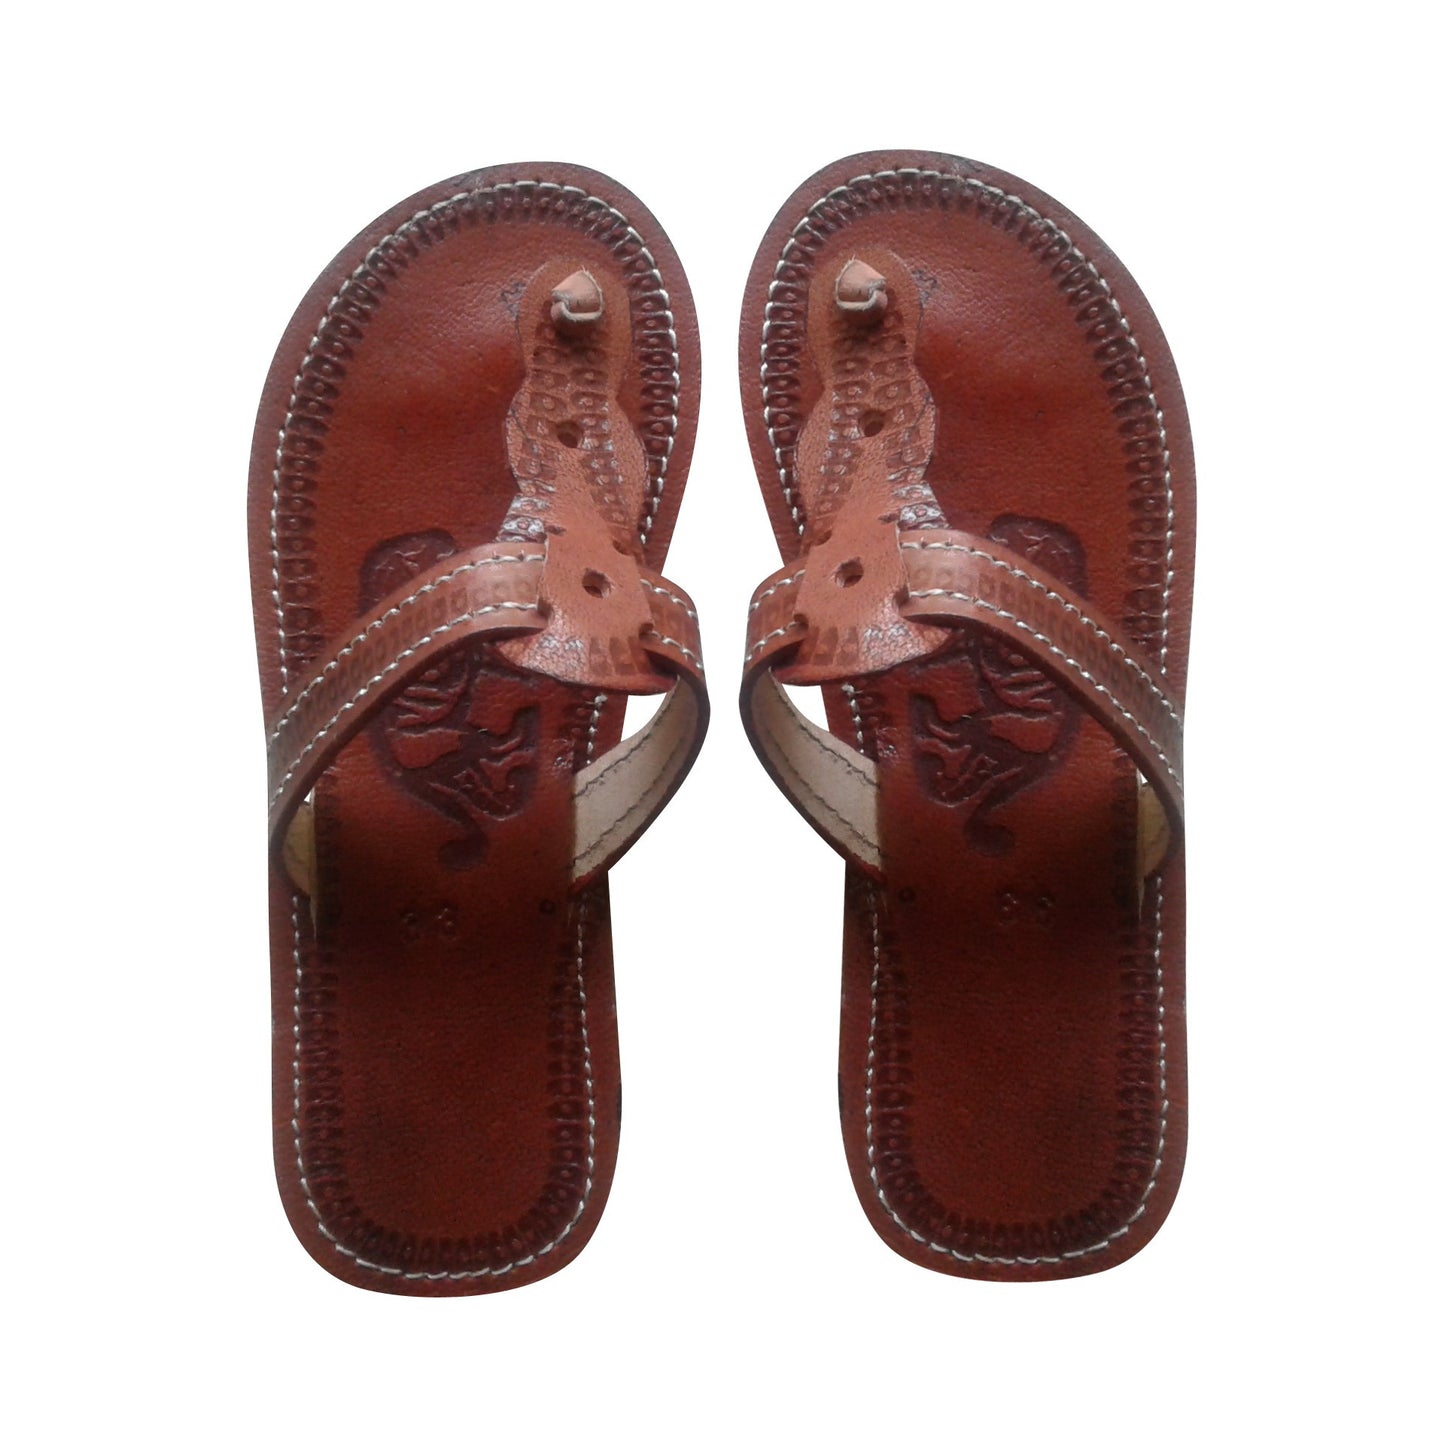 Boys' leather sandals